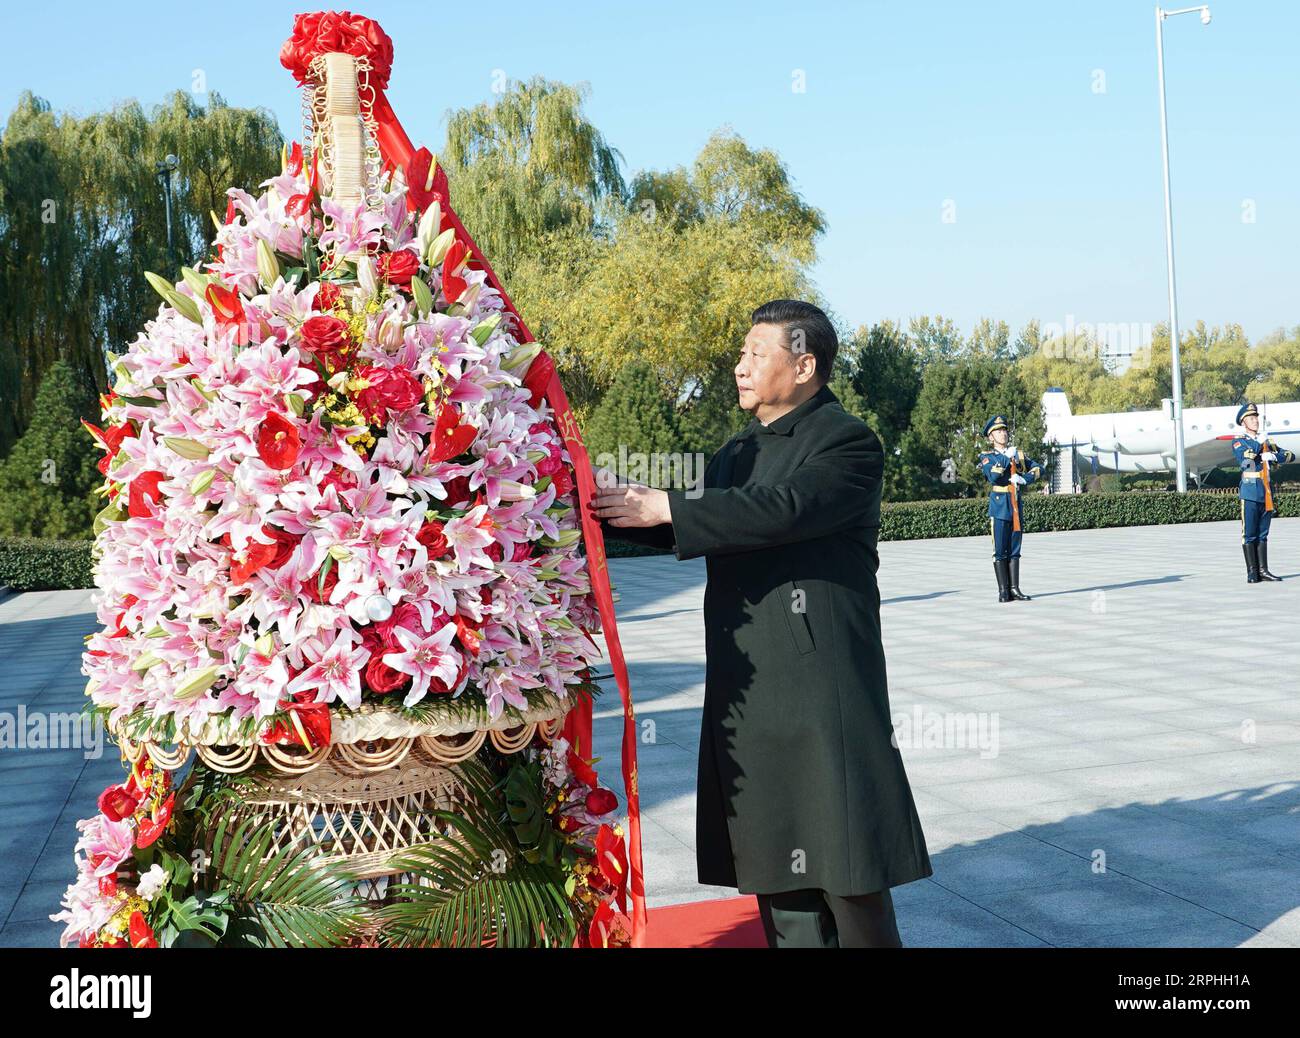 191108 -- BEIJING, Nov. 8, 2019 -- Chinese President Xi Jinping, also general secretary of the Communist Party of China CPC Central Committee and chairman of the Central Military Commission CMC, presents a flower basket to the deceased heroes of the People s Liberation Army PLA Air Force at the China Aviation Museum in Changping District, Beijing, capital of China, Nov. 8, 2019. Xi on Friday attended an event celebrating the 70th founding anniversary of the PLA Air Force in the northern outskirts of Beijing. On behalf of the CPC Central Committee and the CMC, he extended congratulations on the Stock Photo